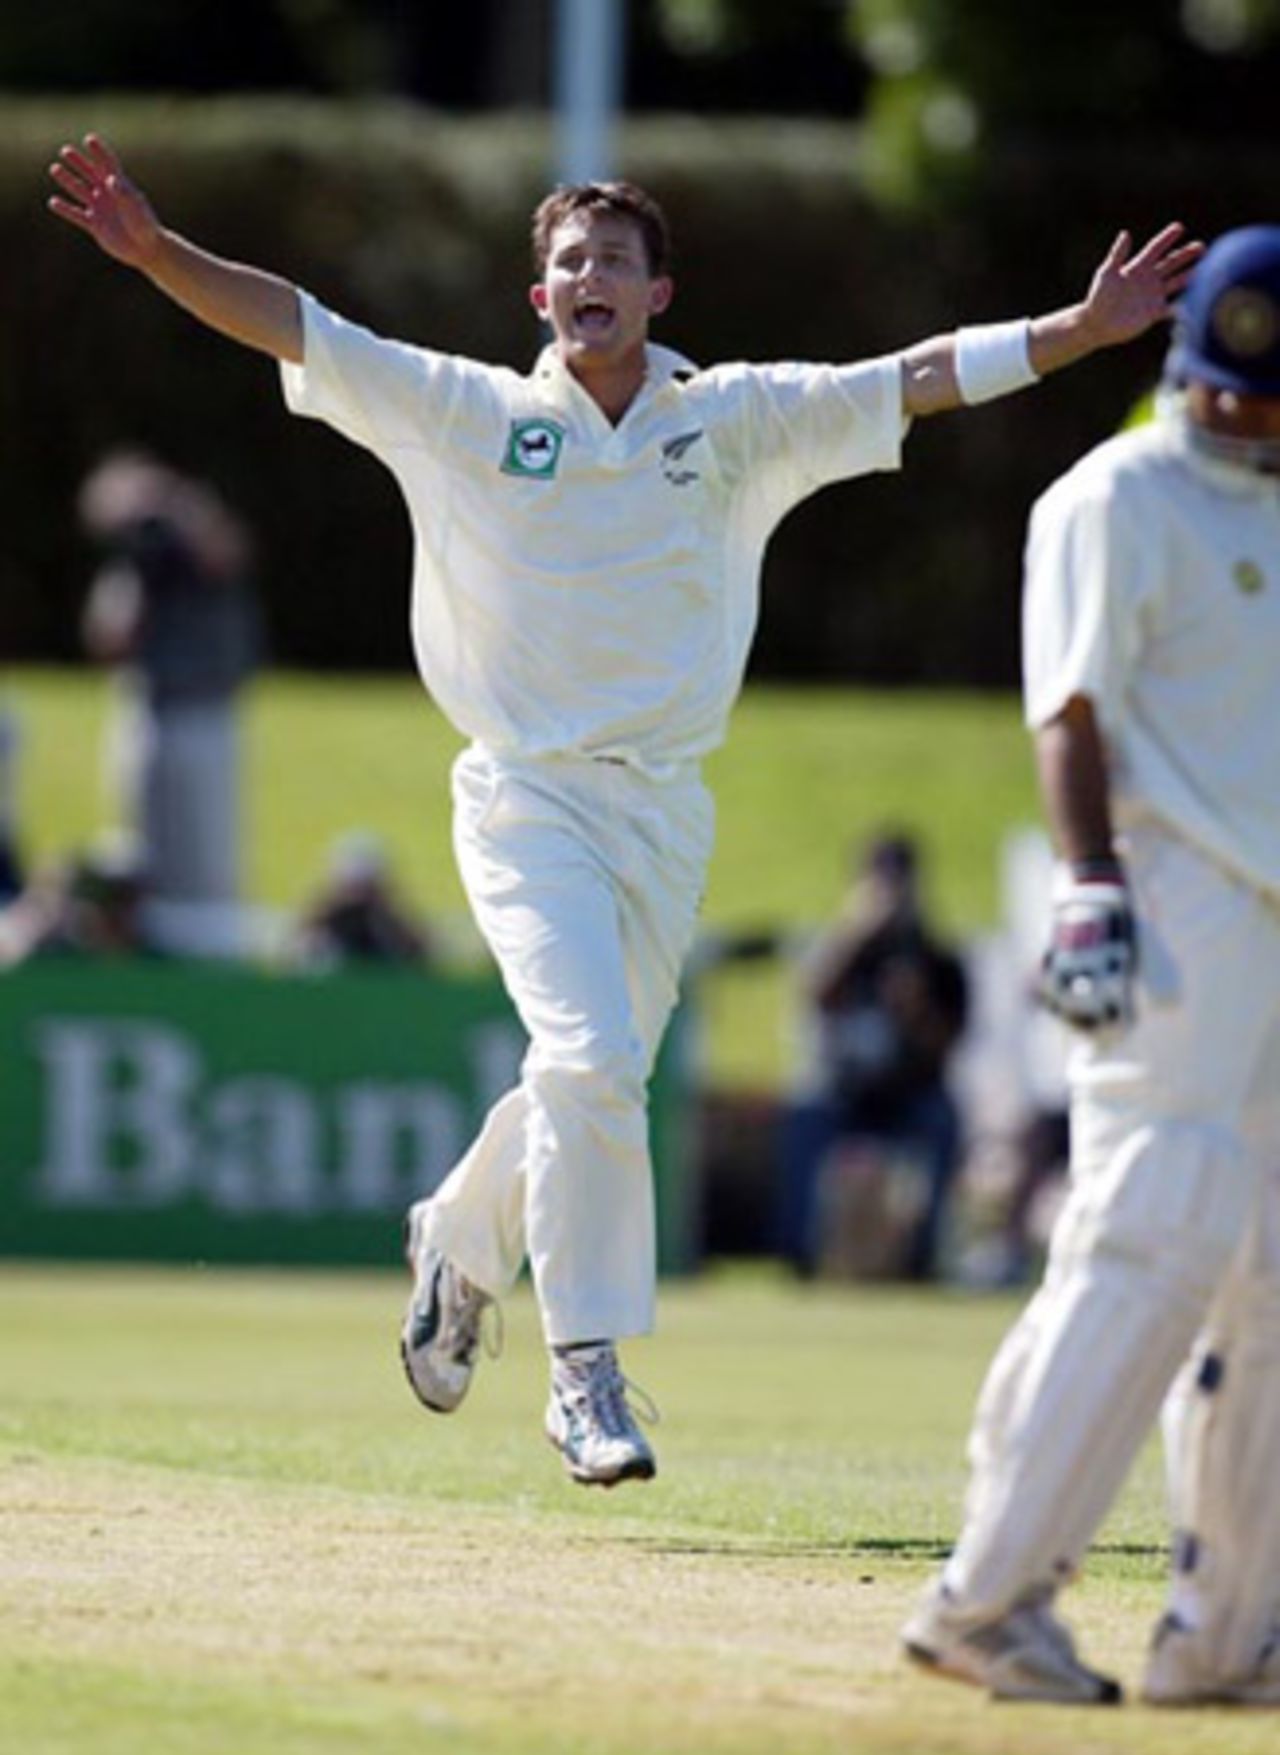 New Zealand bowler Shane Bond celebrates the dismissal of Indian batsman Virender Sehwag, caught by Mark Richardson at short leg for one in his first innings. 2nd Test: New Zealand v India at Westpac Park, Hamilton, 19-23 December 2002 (20 December 2002).